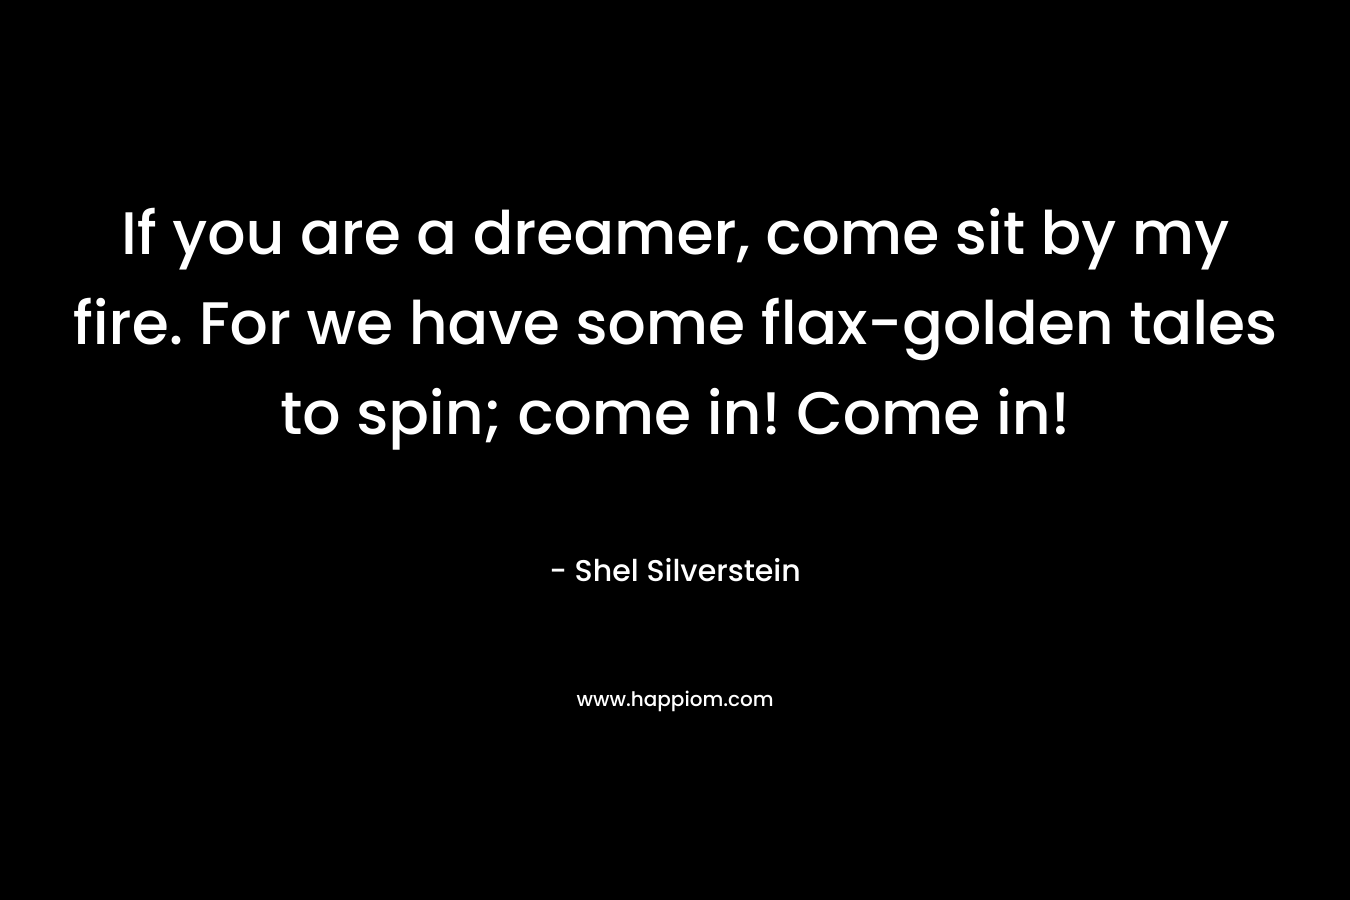 If you are a dreamer, come sit by my fire. For we have some flax-golden tales to spin; come in! Come in! – Shel Silverstein